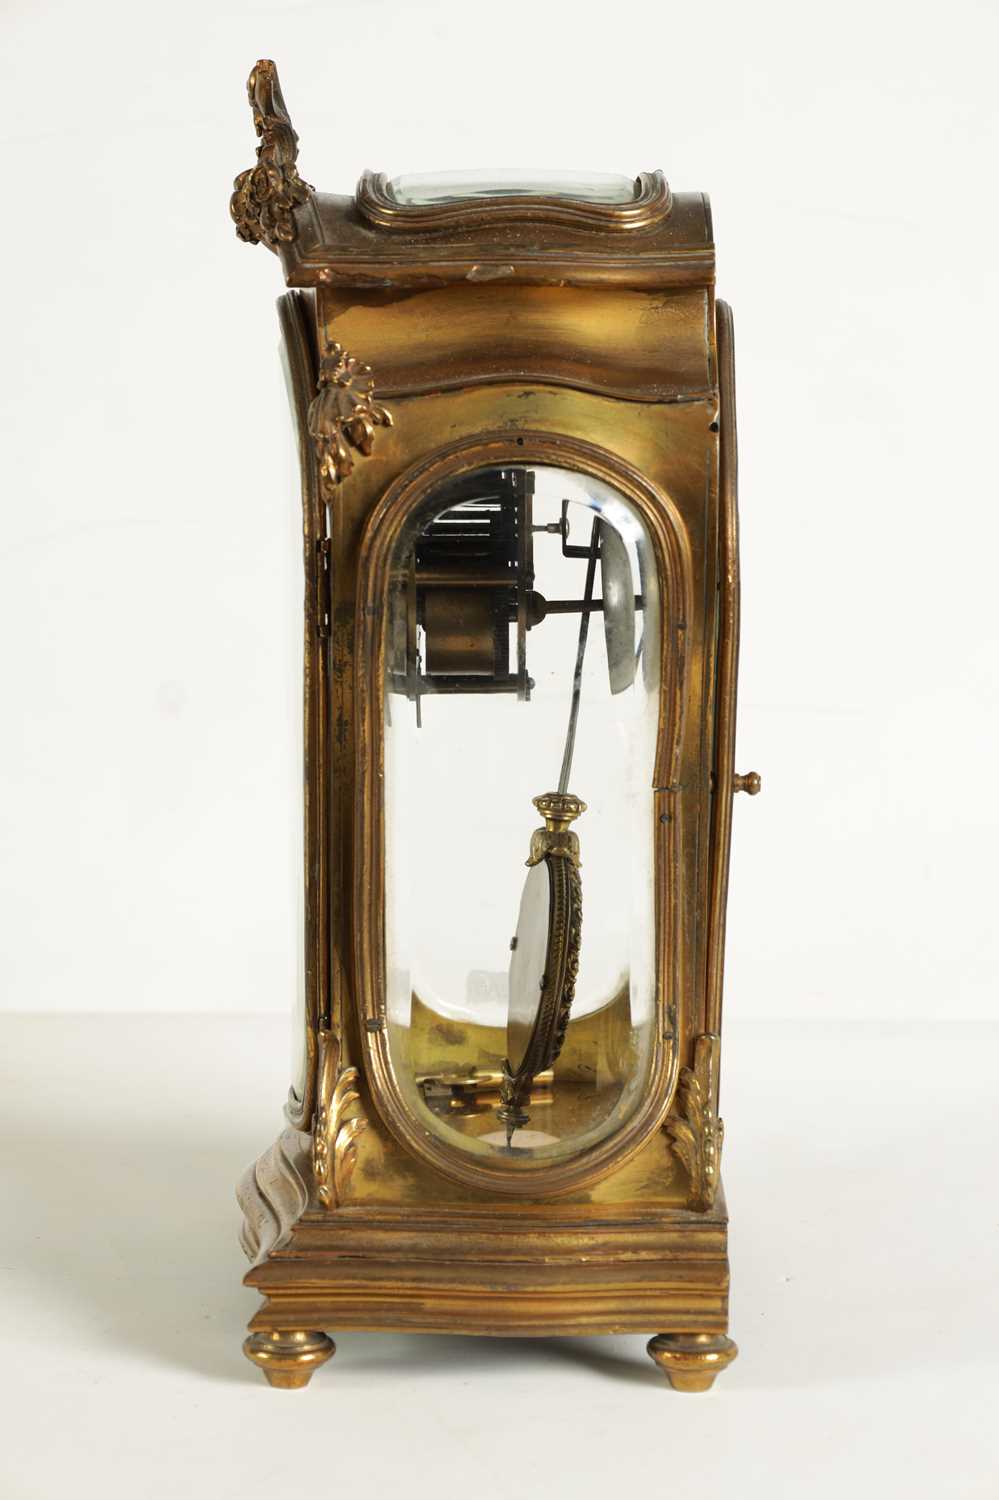 A LATE 19TH CENTURY FRENCH ART NOUVEAU GILT BRASS FOUR GLASS MANTEL CLOCK - Image 6 of 13